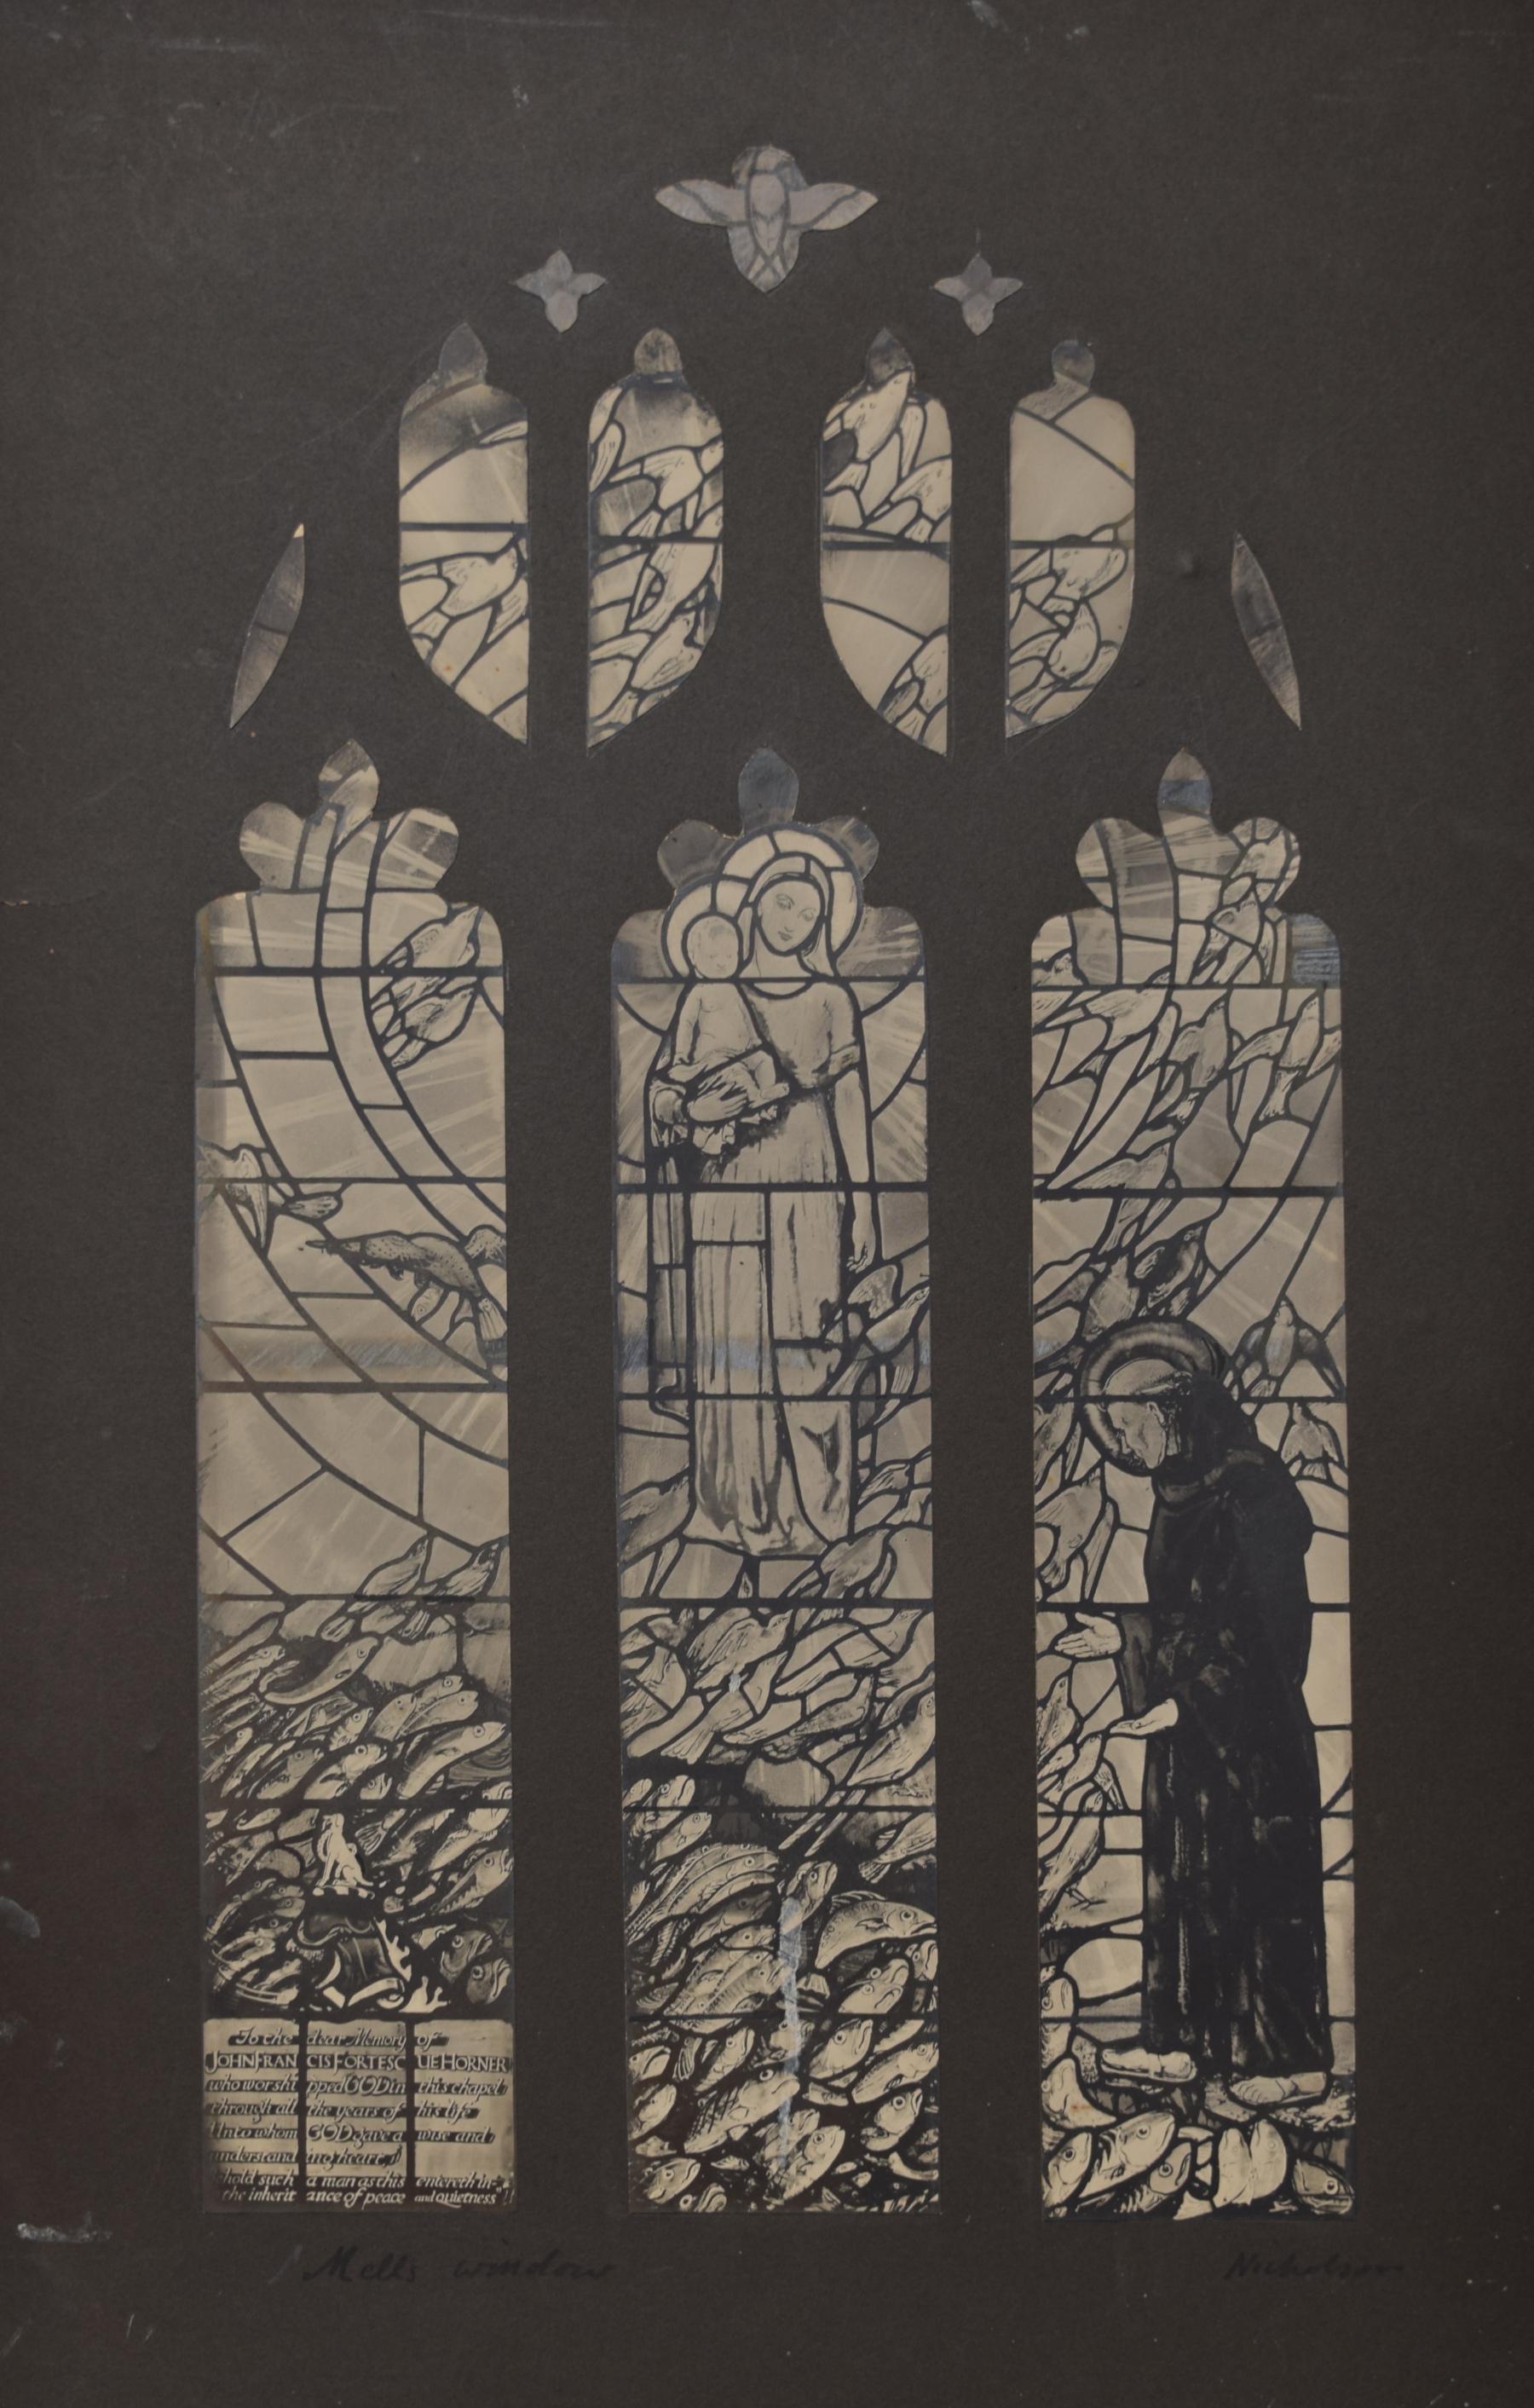 To see more stained glass designs, scroll down to "More from this Seller" and below it click on "See all from this Seller." 

William Nicholson (1872 - 1949)
Mells Window
Photographic collage
57 x 33 cm

Titled below and signed lower right in